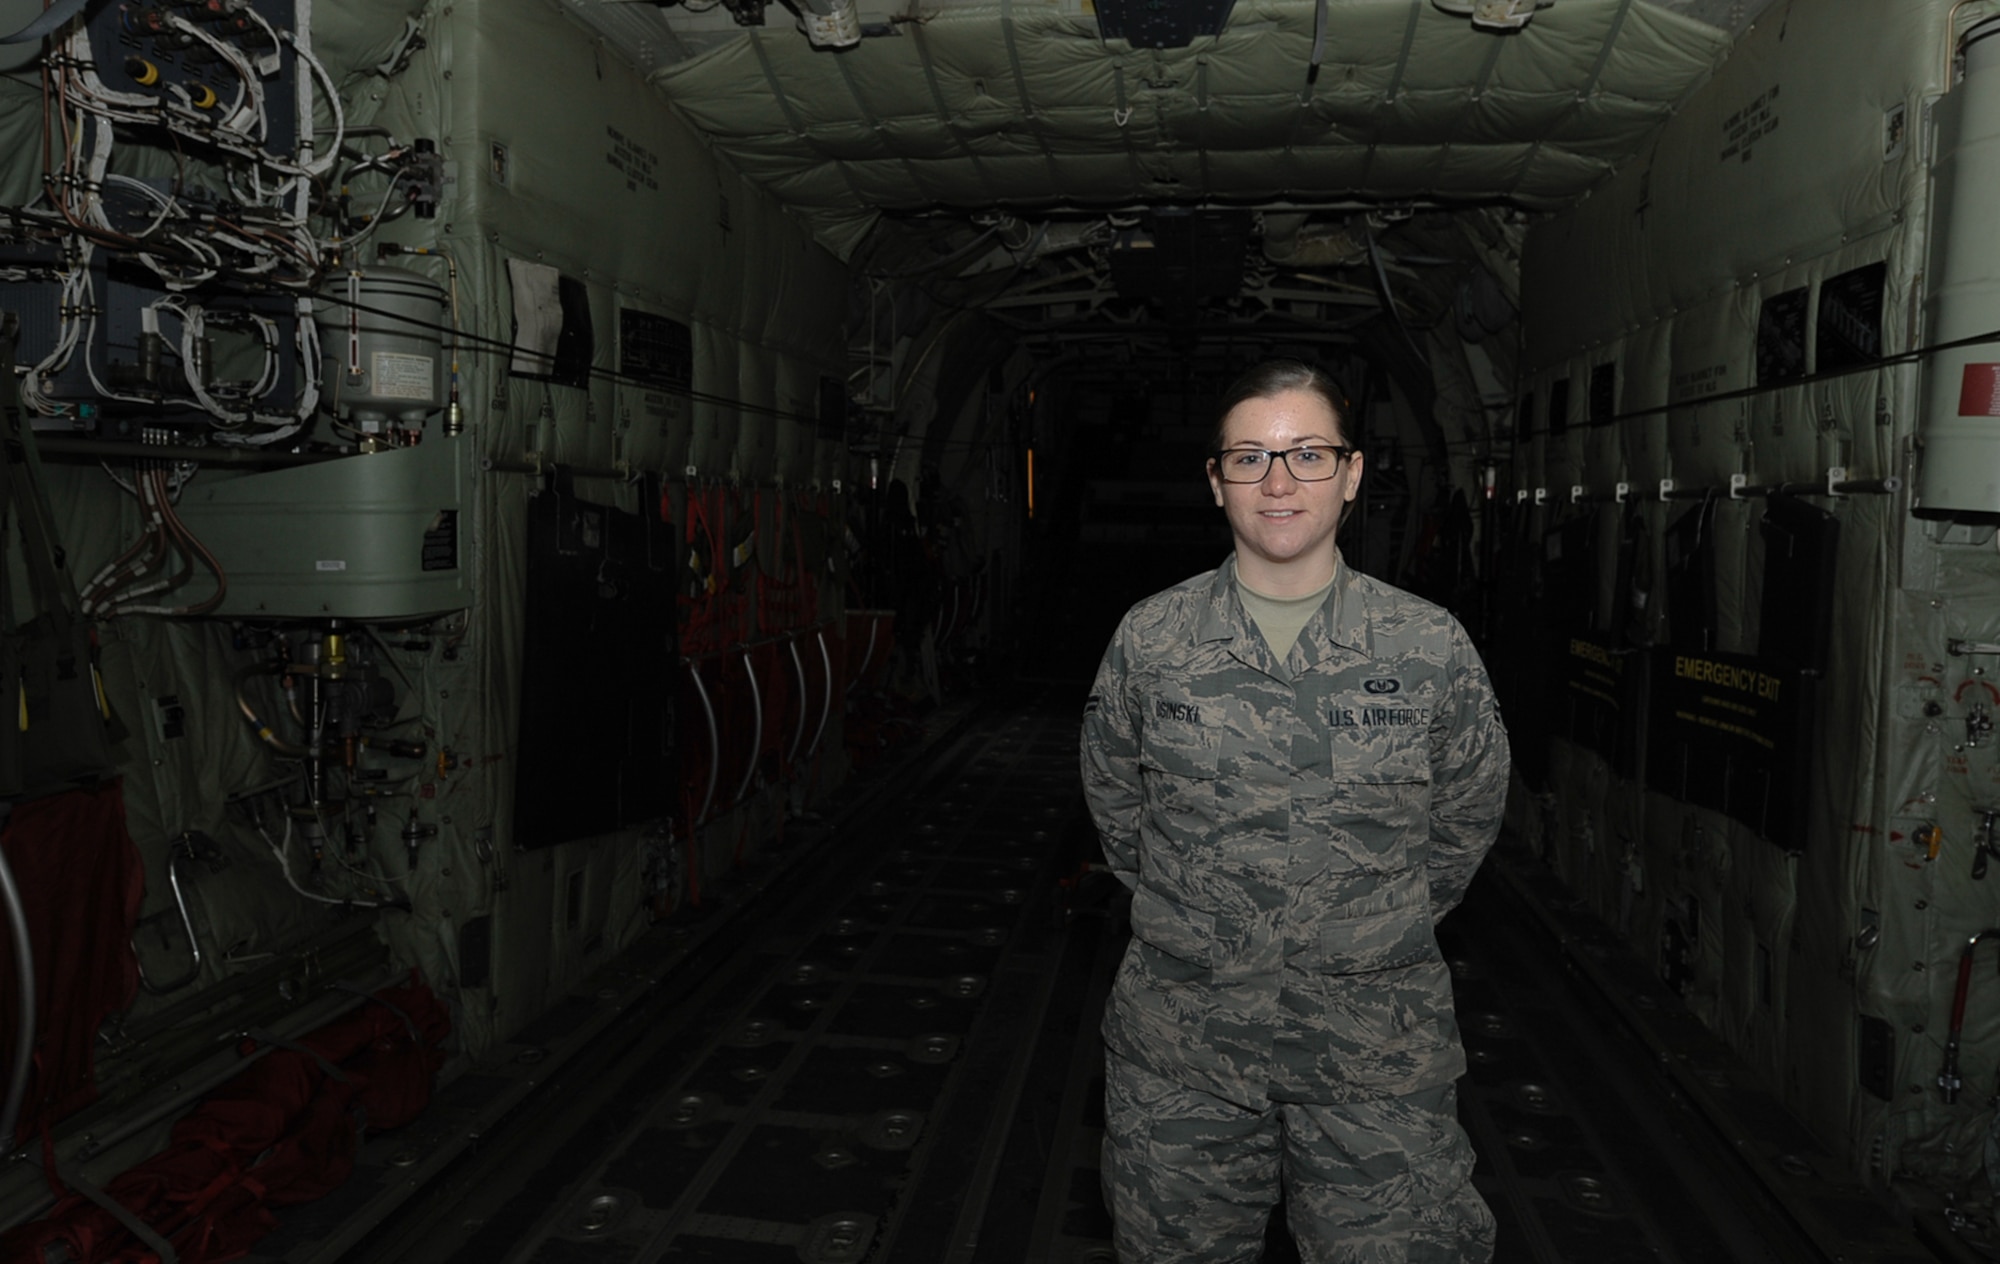 Airman 1st Class Adriya Osinski, 86th Operations Support Squadron aircrew flight equipment apprentice, poses inside of a 37th Airlift Squadron C-130 J Super Hercules aircraft at Ramstein Air Base, Germany, Nov. 4, 2016. Osinski is responsible for inspecting and prepositioning survival equipment on the aircraft, as well as inspecting and maintaining equipment such as oxygen masks, helmets and night vision goggles used for routine flying operations.
(U.S. Air Force photo by Airman 1st Class Savannah L. Waters)

